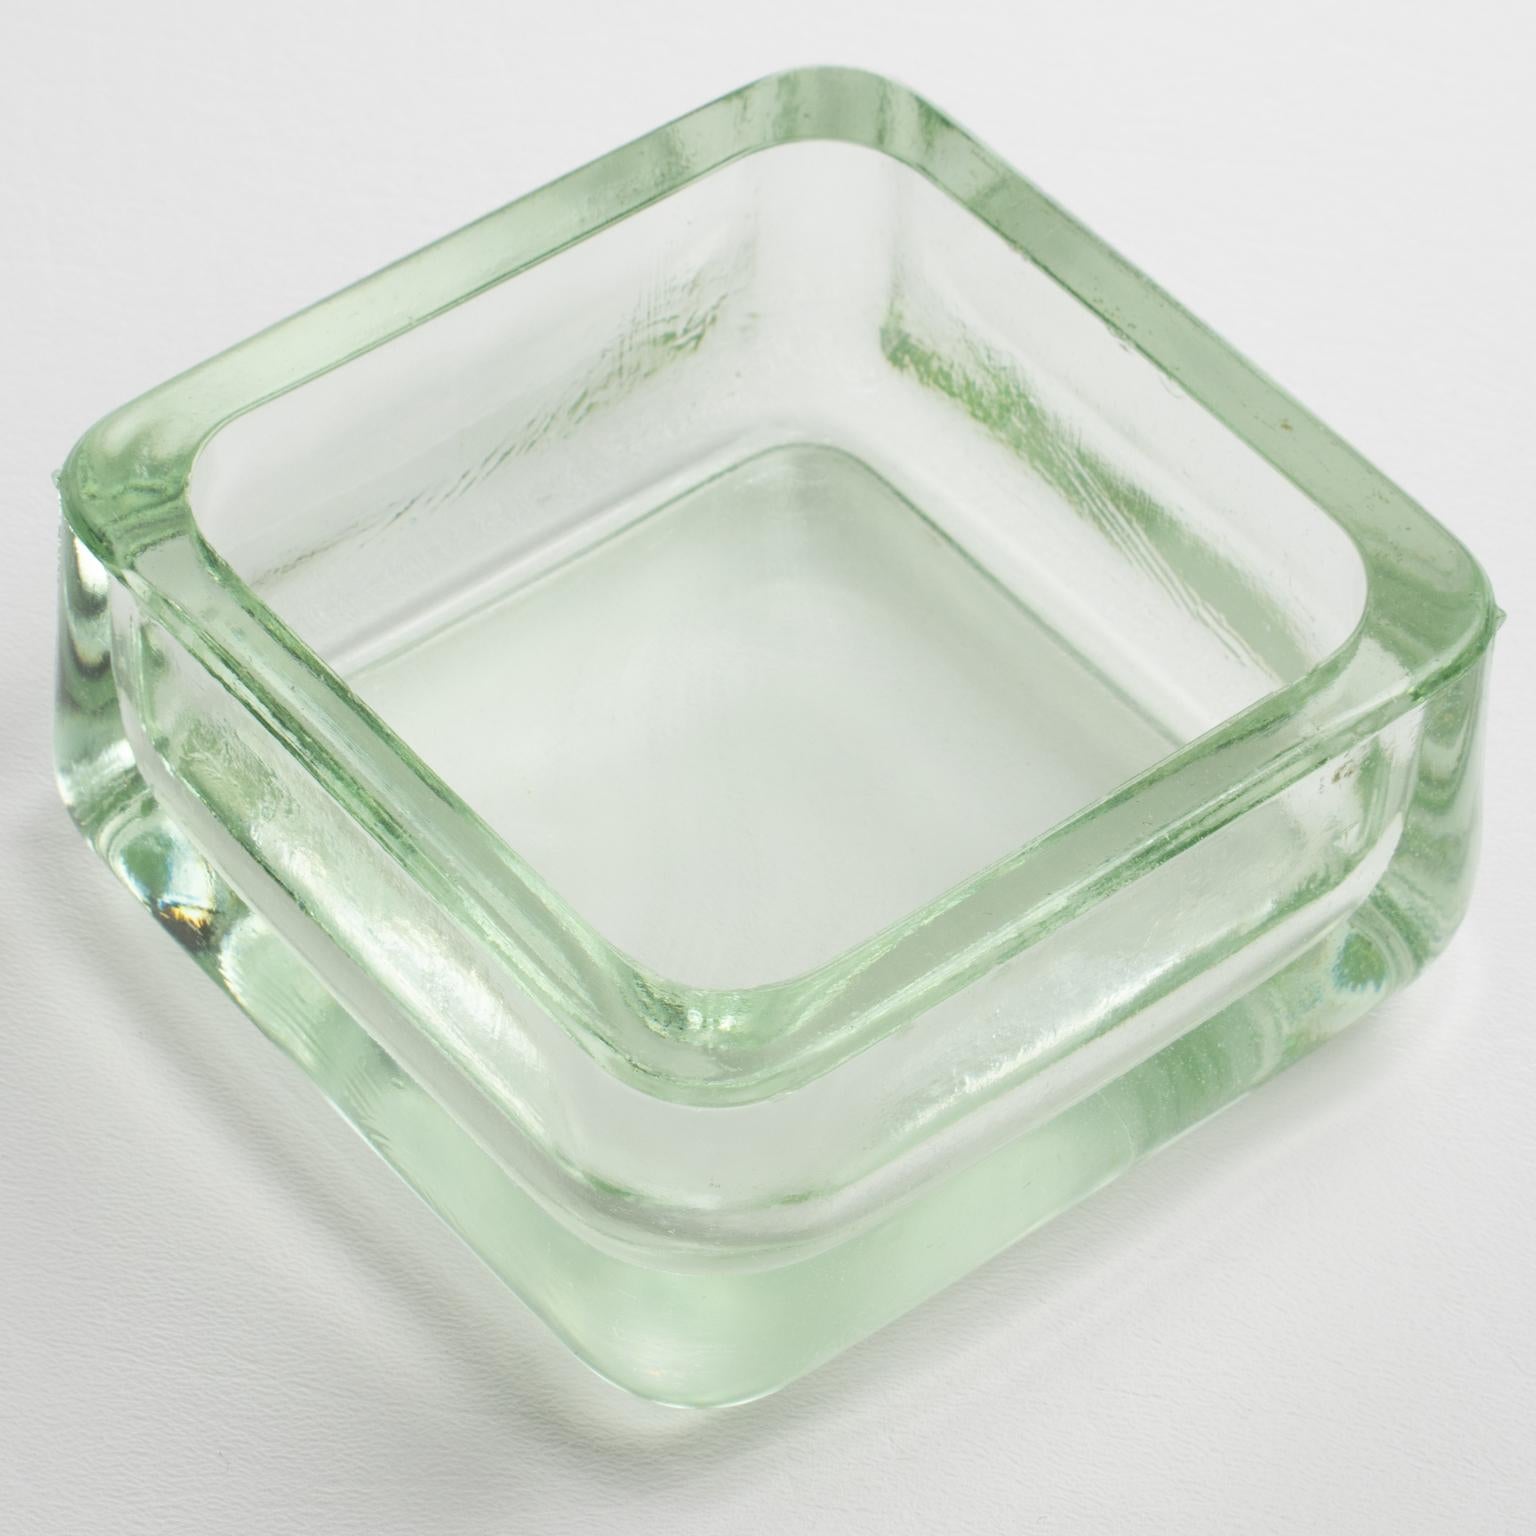 French Designed by Le Corbusier for Lumax Molded Glass Desk Accessory Ashtray Catchall For Sale